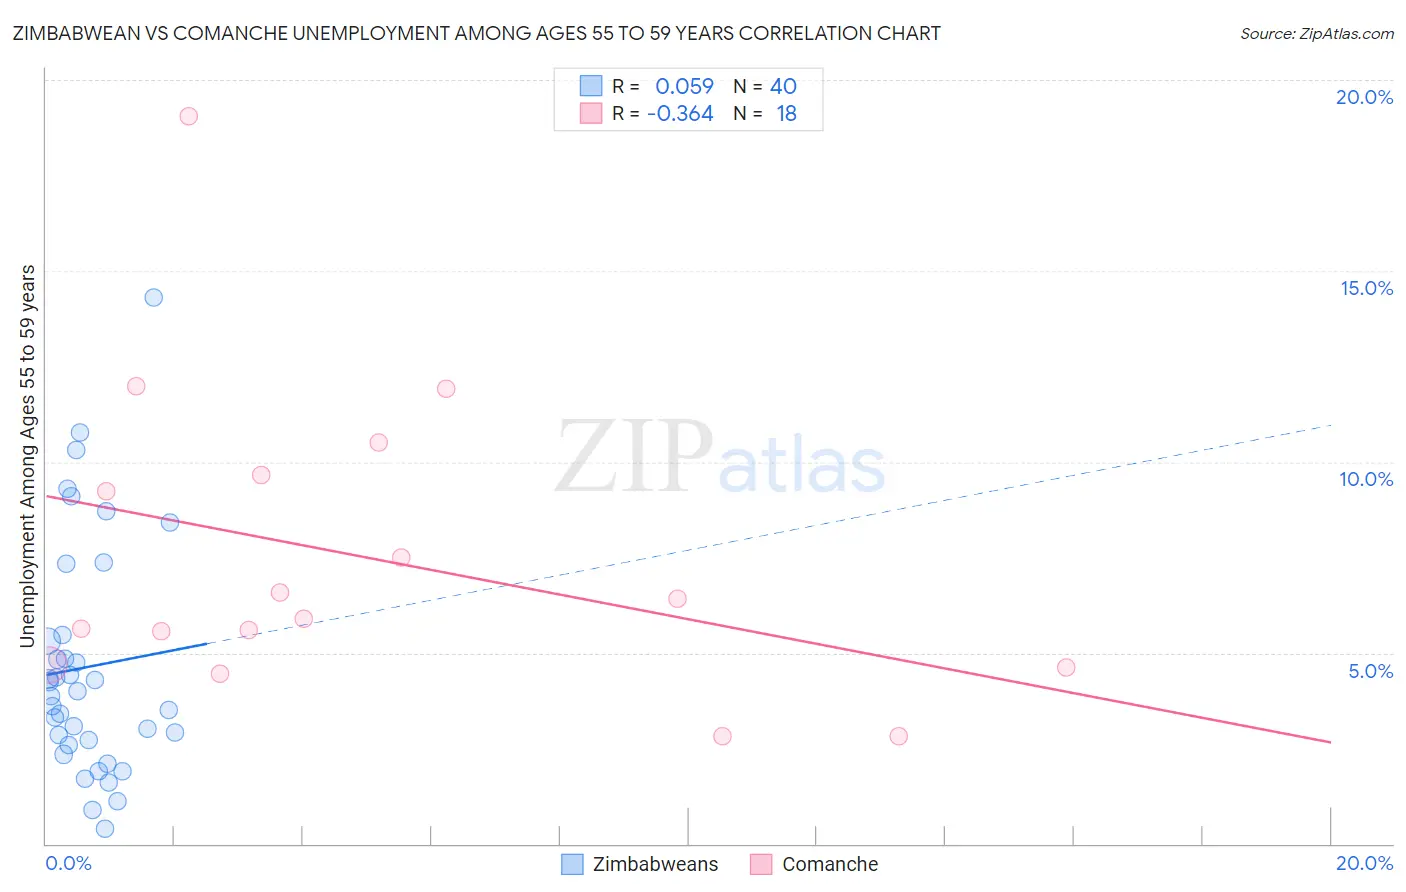 Zimbabwean vs Comanche Unemployment Among Ages 55 to 59 years